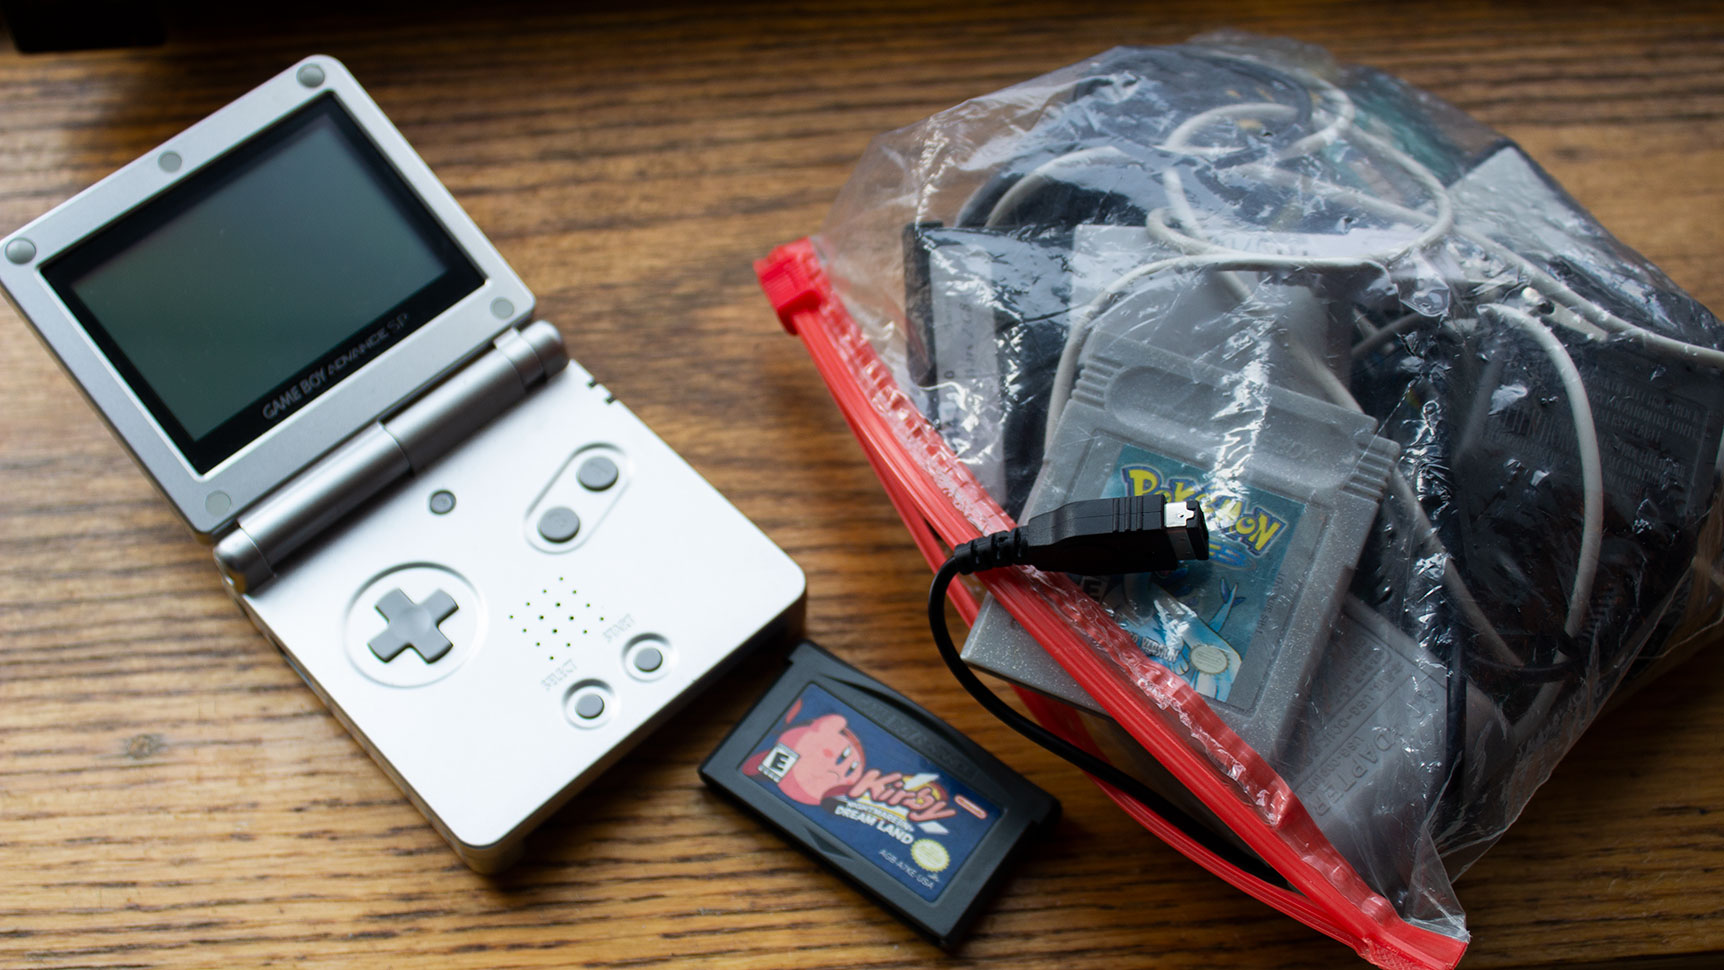 It's not my GBA SP, Nightmare in Dreamland, and stash of cartridges/cords, but it's almost the same as what I carried around back in the day. (Photo: Victoria Song/Gizmodo)